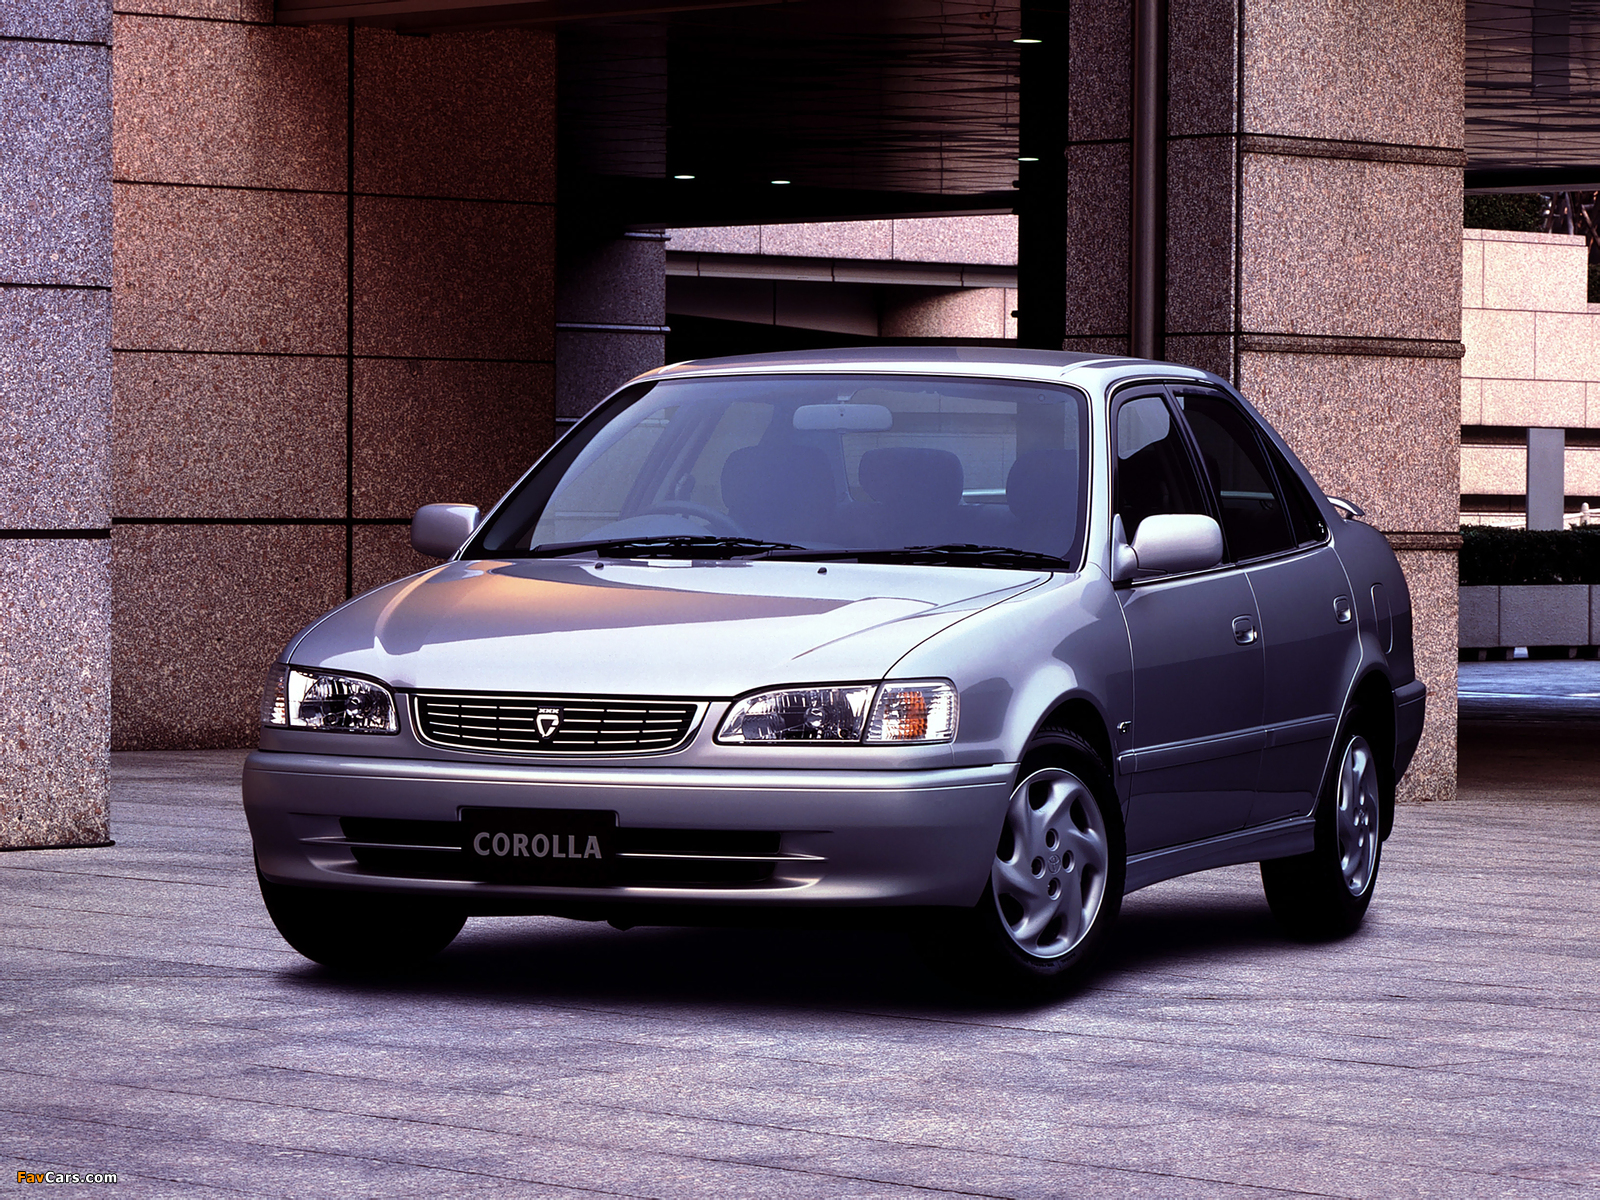 Toyota Corolla 1.6 GT (AE111) 1997–2000 images (1600 x 1200)